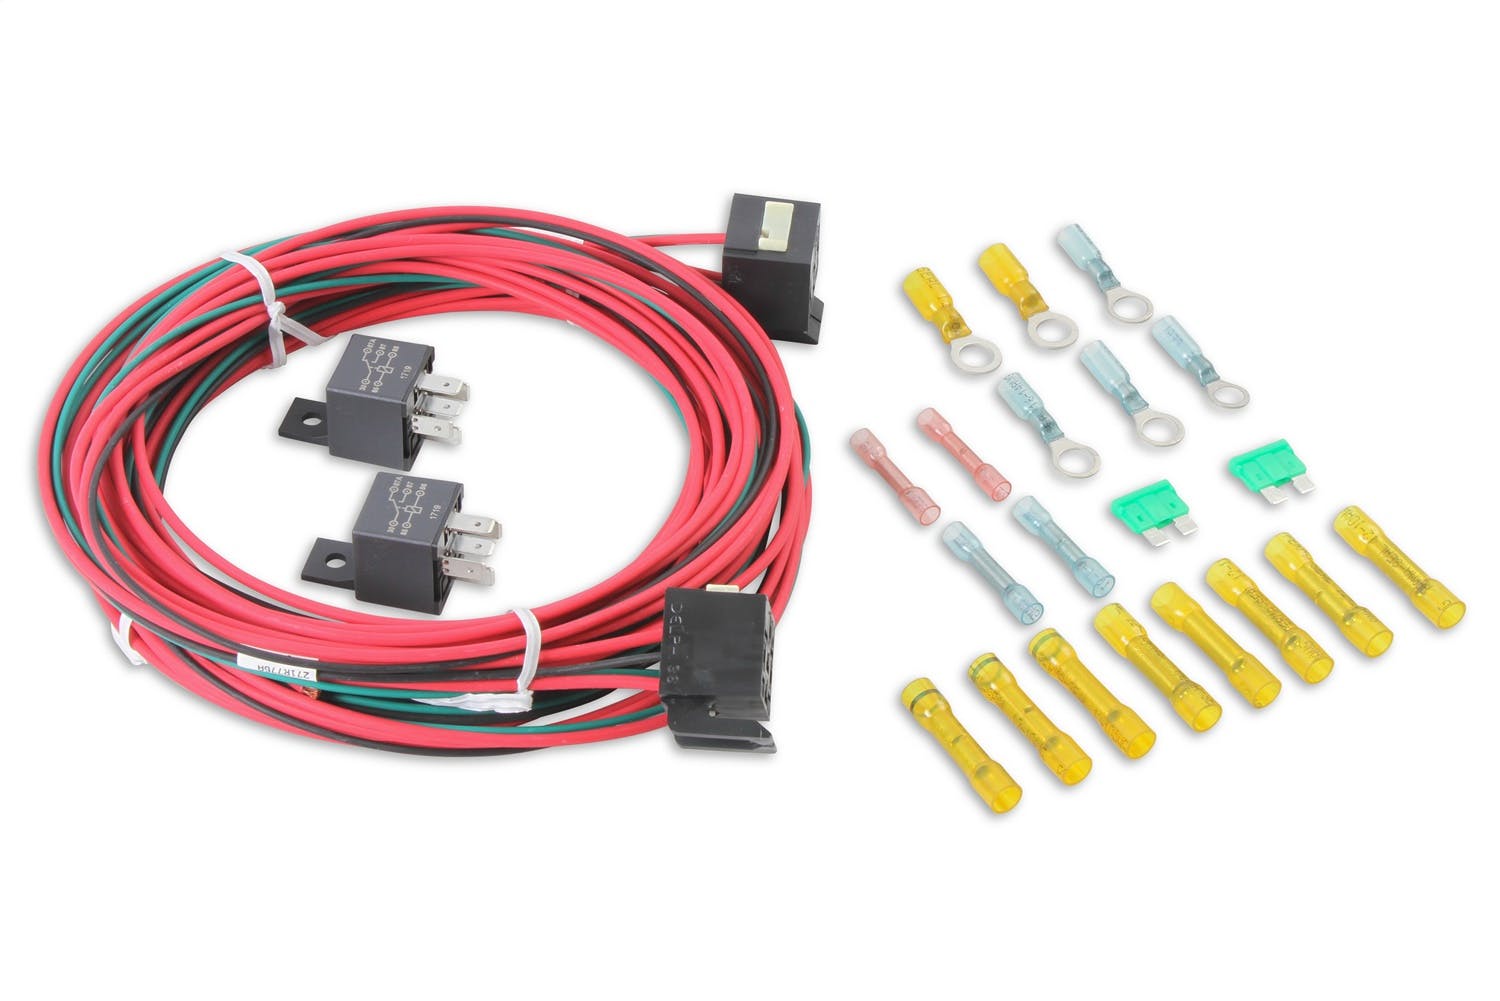 Holley 12-759 Fuel Pump Relay Kit